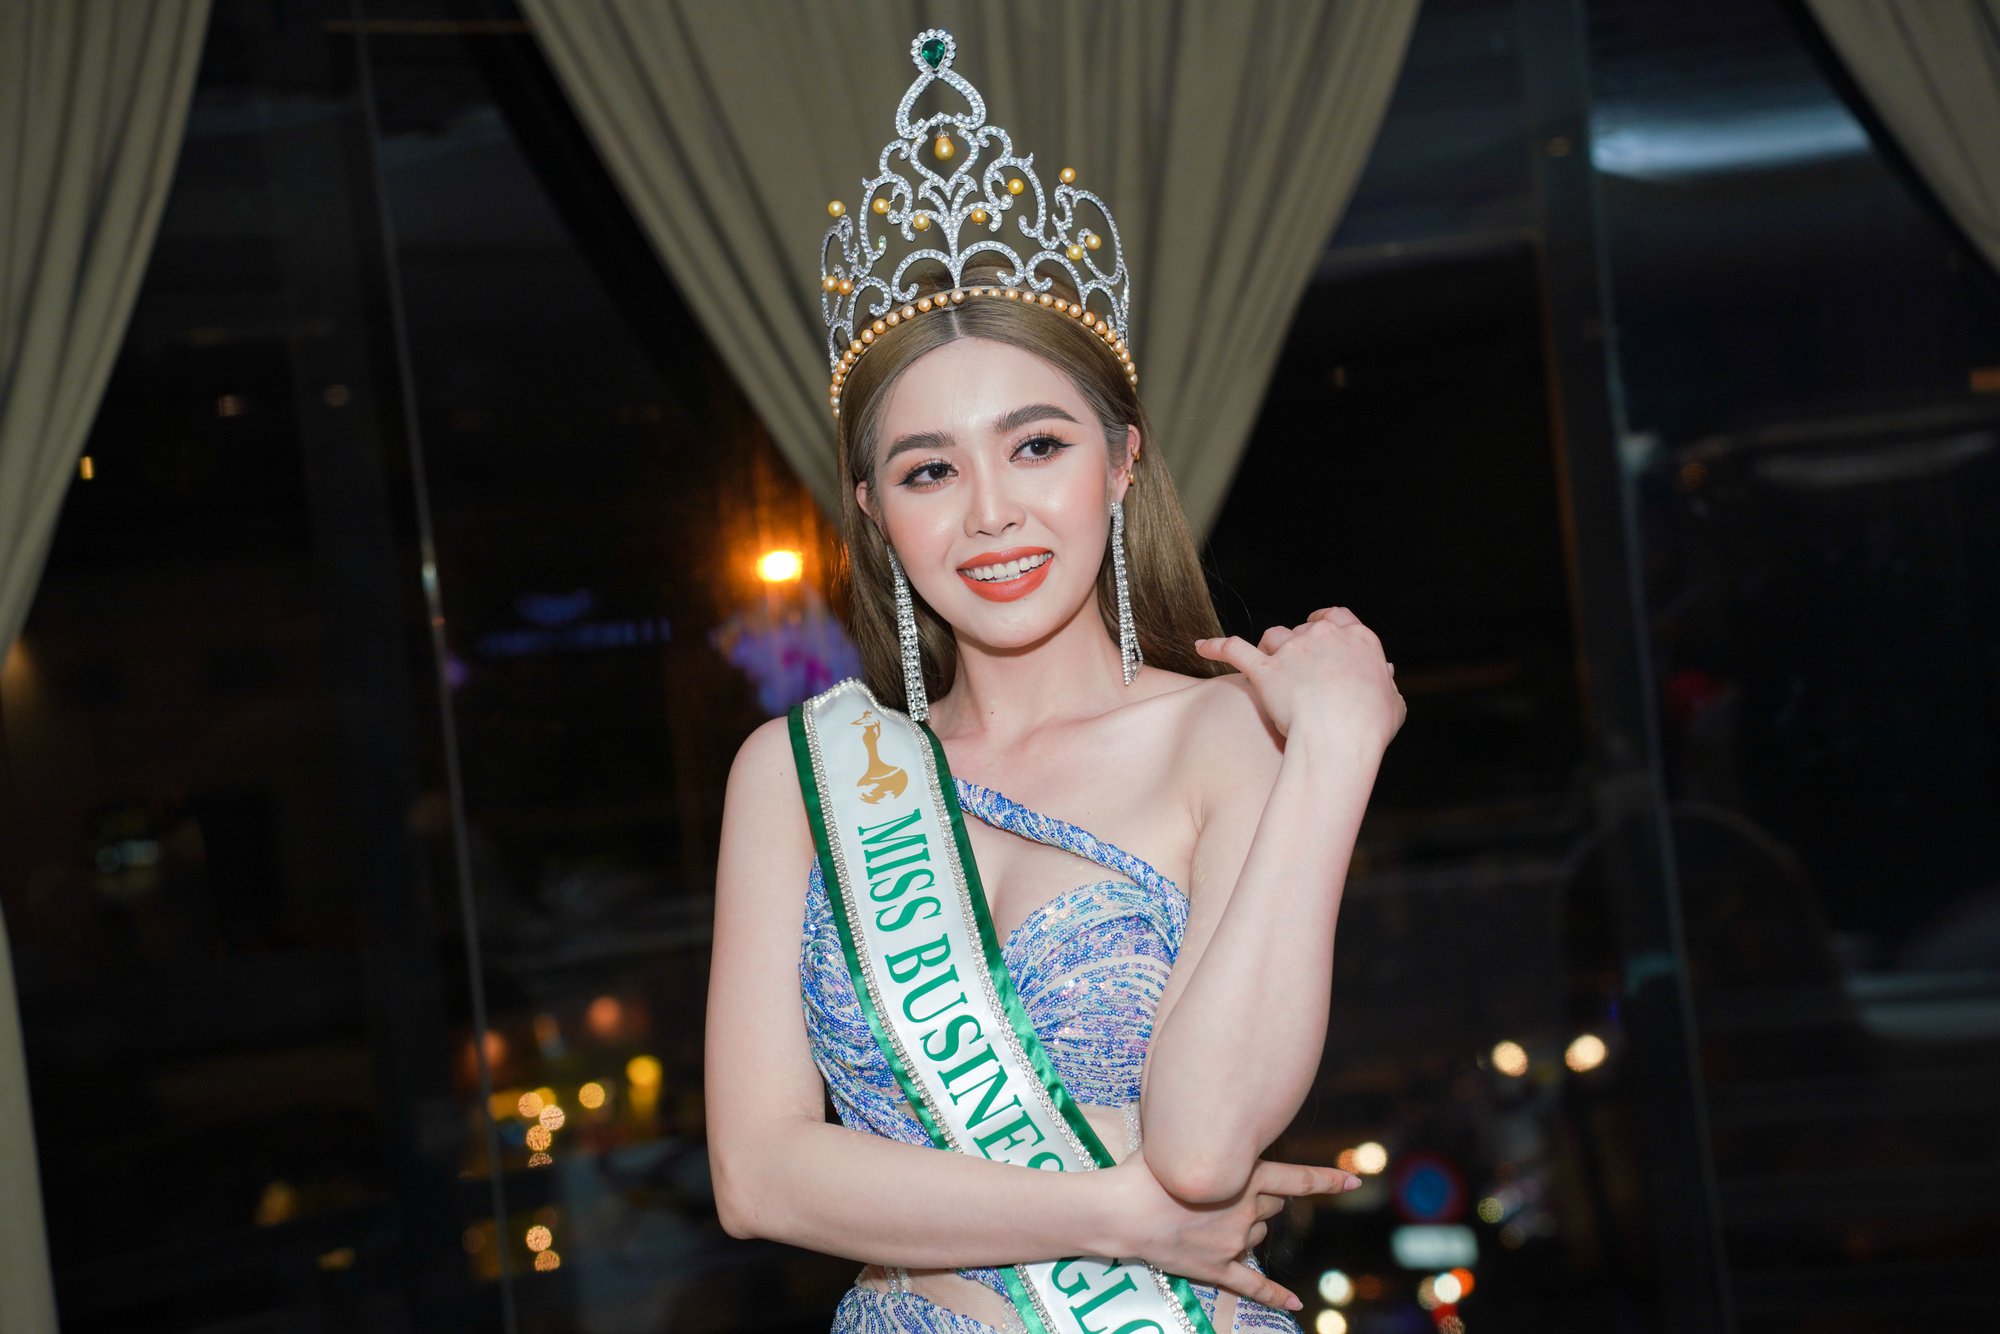 Miss Business Global was stripped of her crown after half a year of coronation